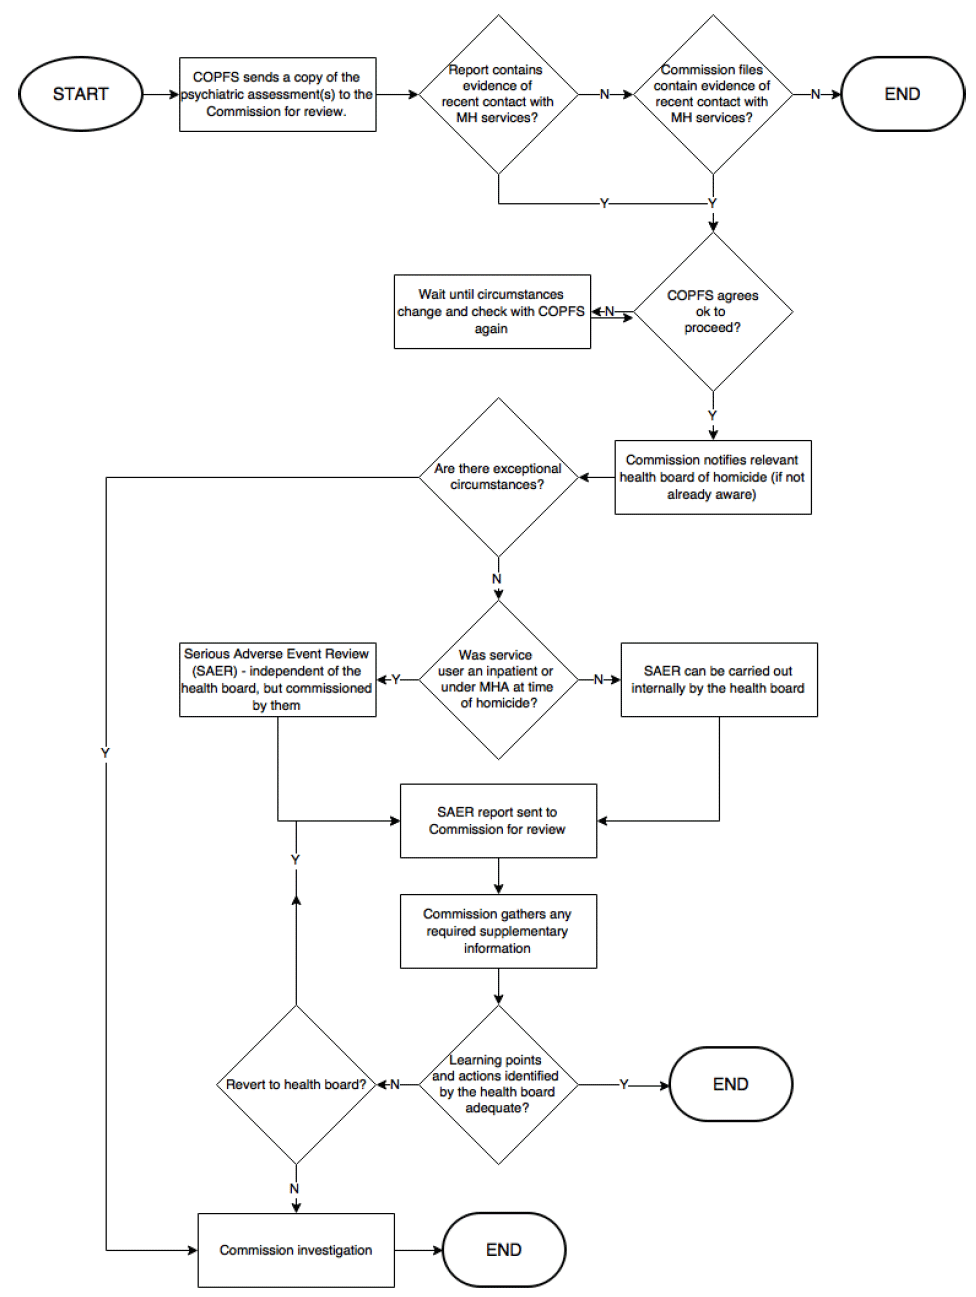 Flowchart Summarising the Revised Process Proposed by the Commission